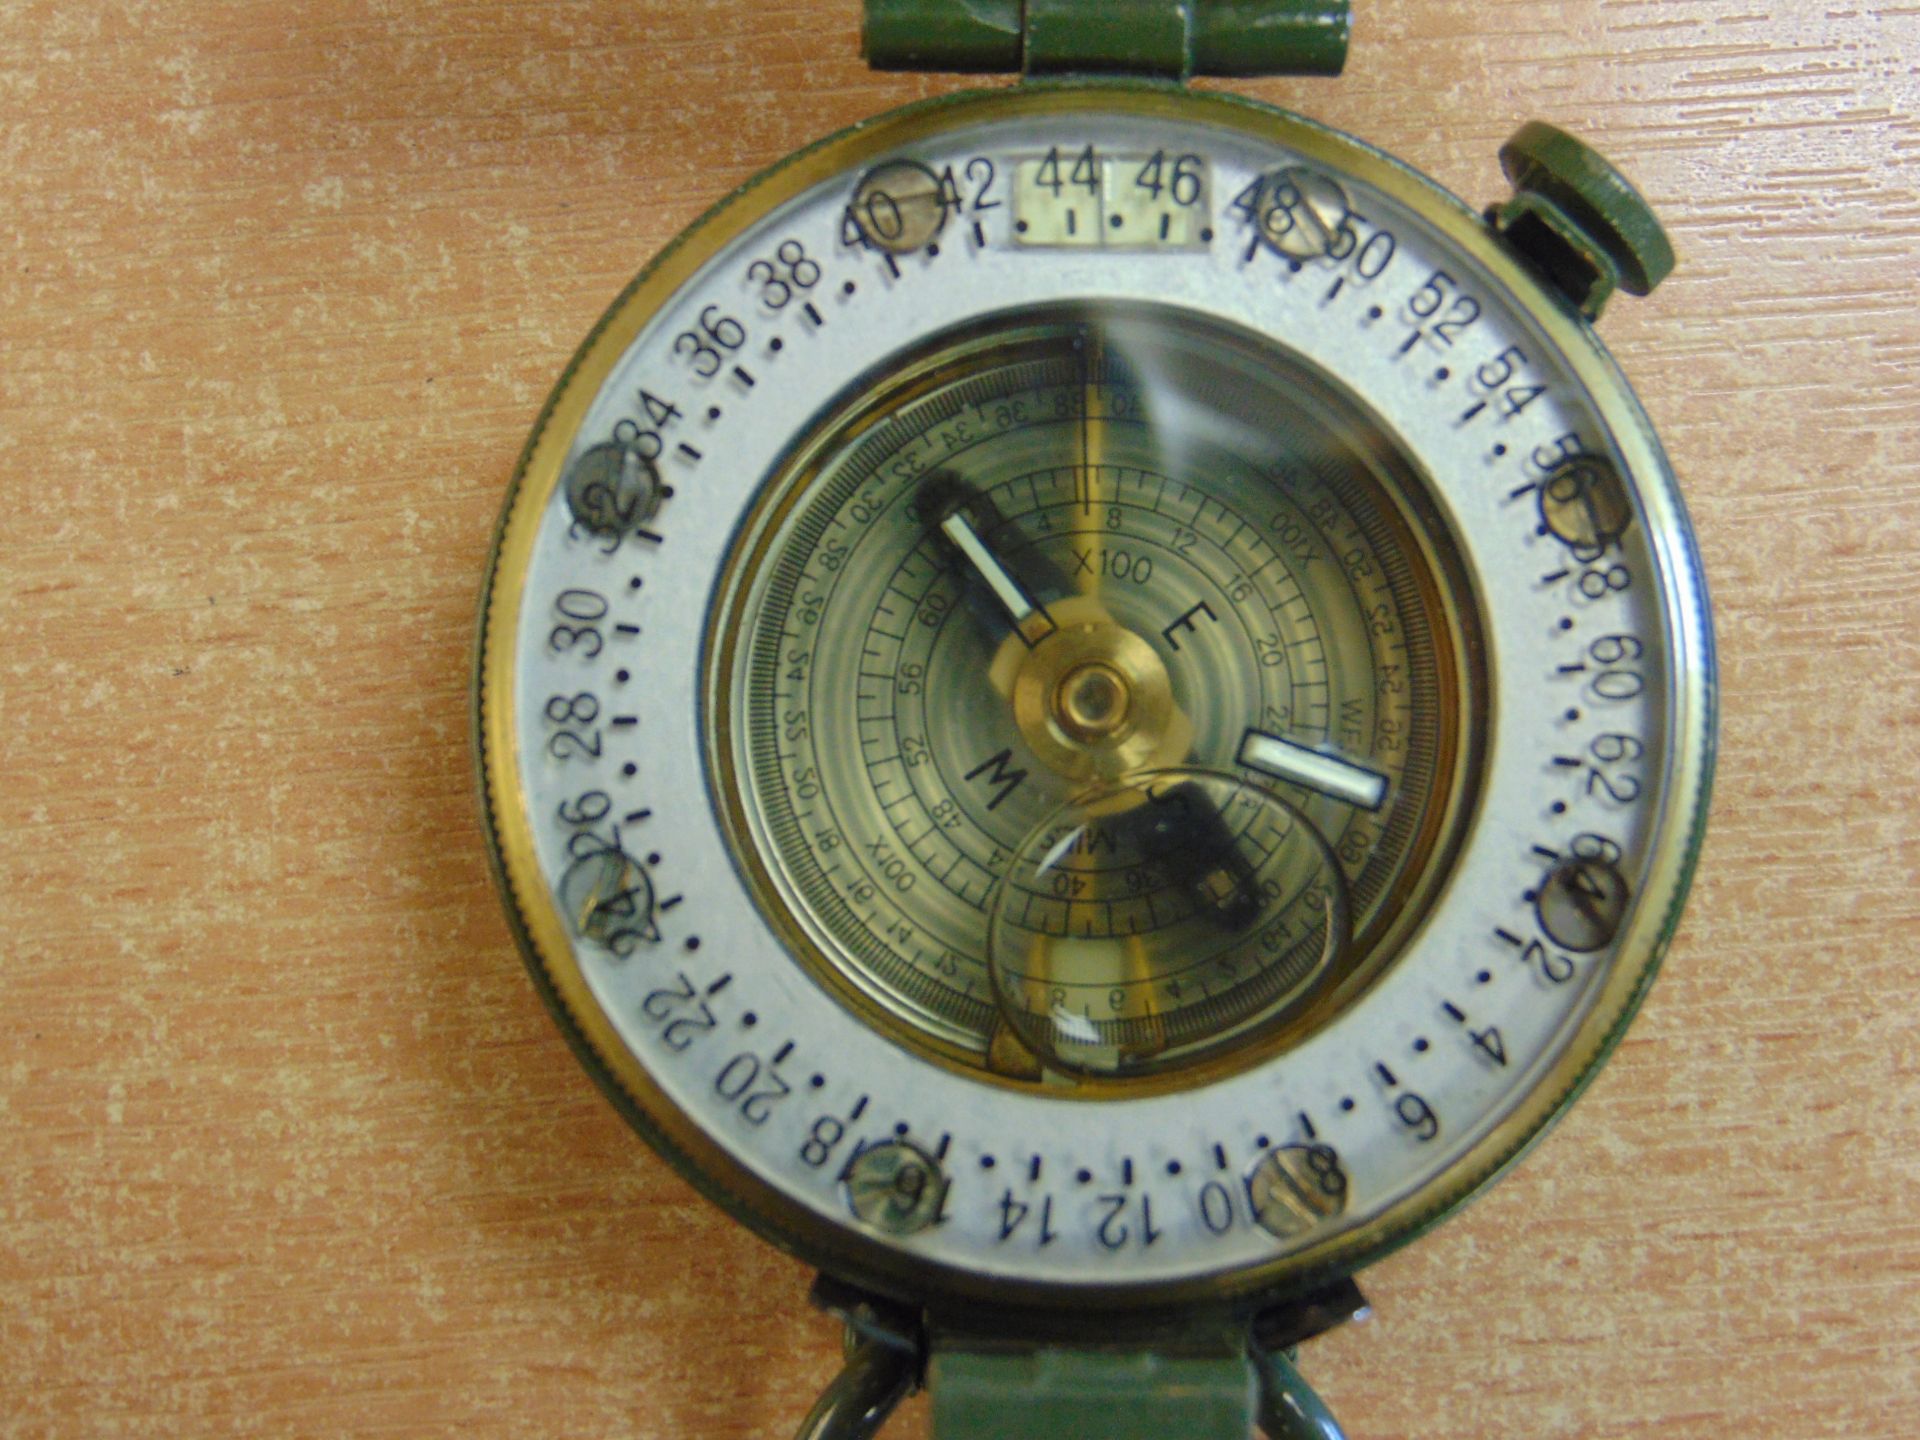 UNISSUED STANLEY LONDON PRISMATIC COMPASS NATO MARKED BRITISH ARMY - Image 4 of 7